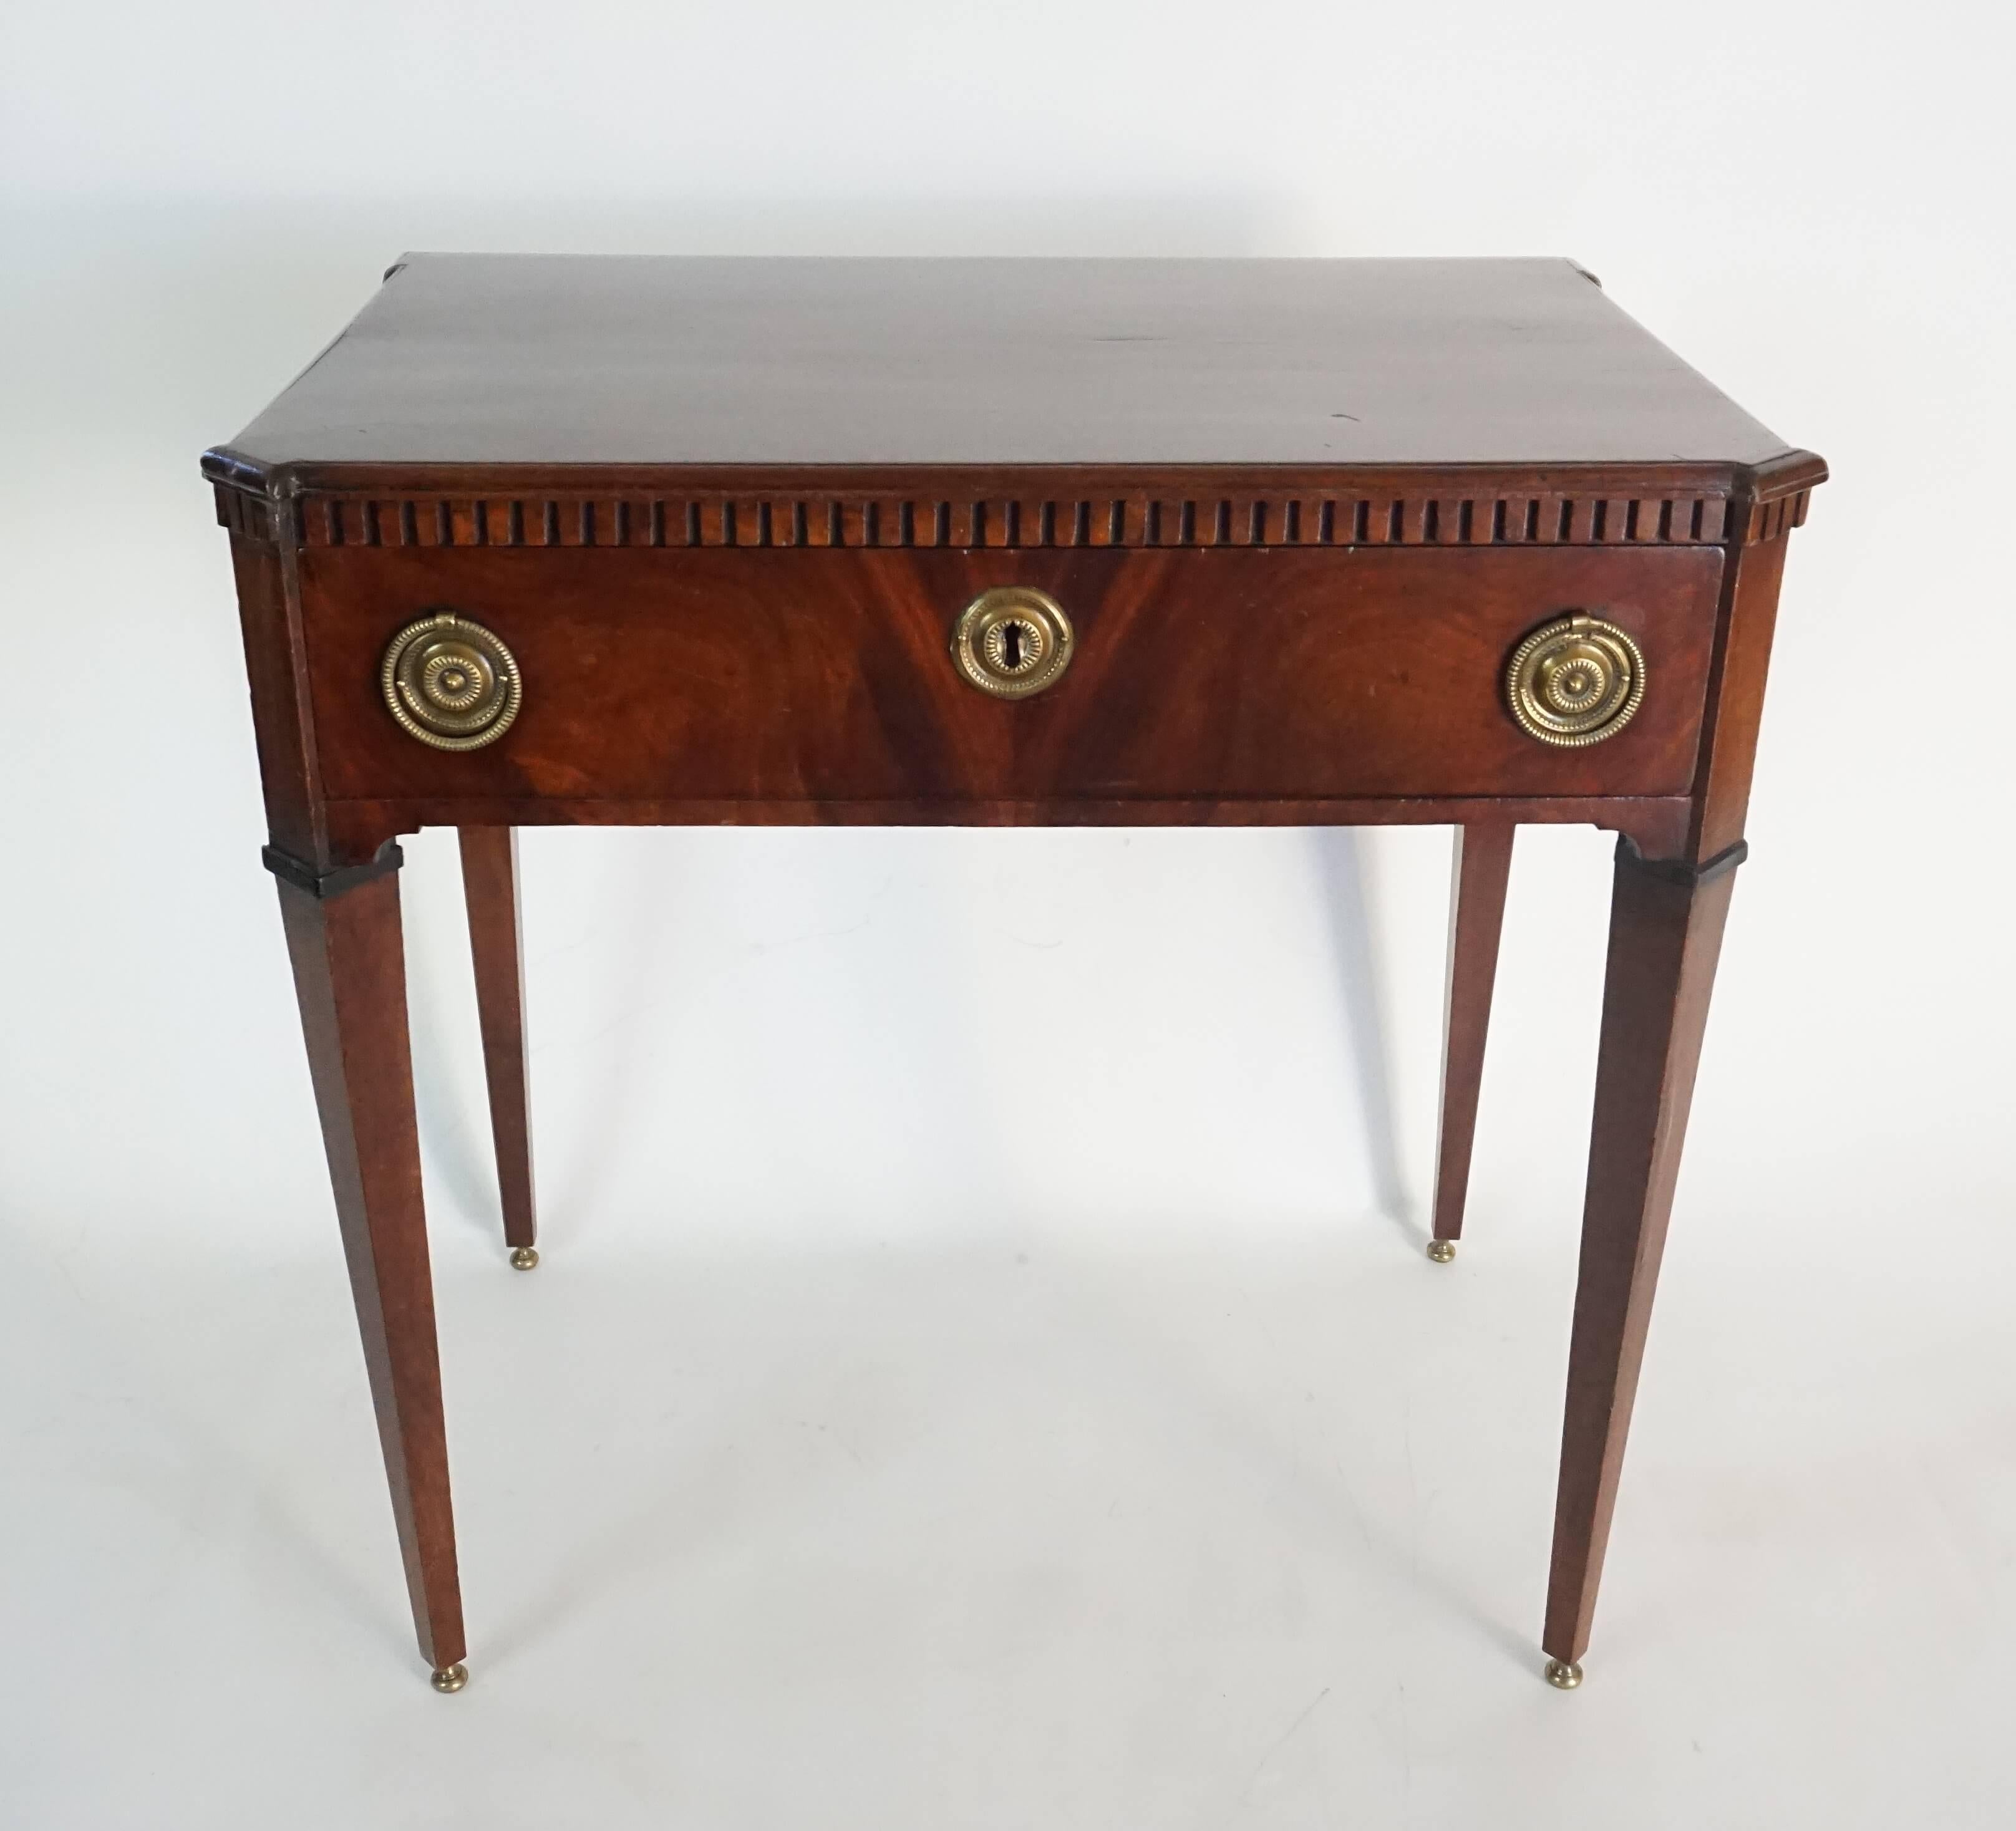 Dutch mahogany side table of rectangular form having dentil moulded cornice above single drawer with original brass hardware on tapered legs ending in brass knob feet, circa 1810.